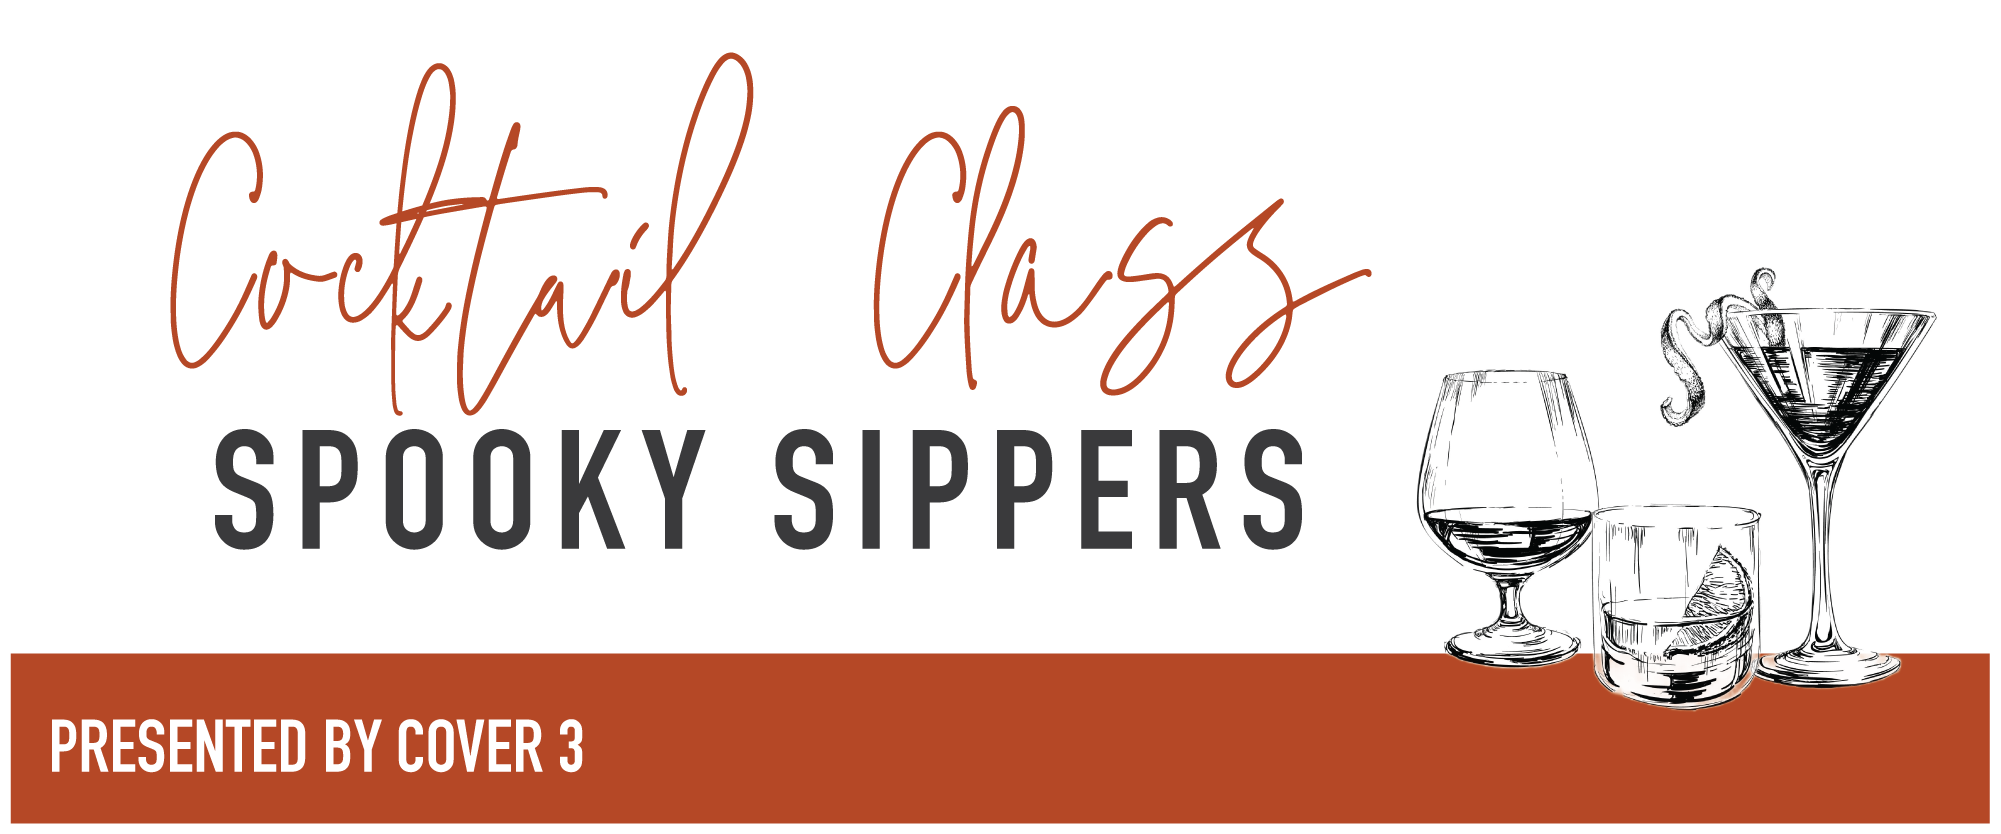 Cocktail Class Updated Graphics - Spooky Sippers-02.png